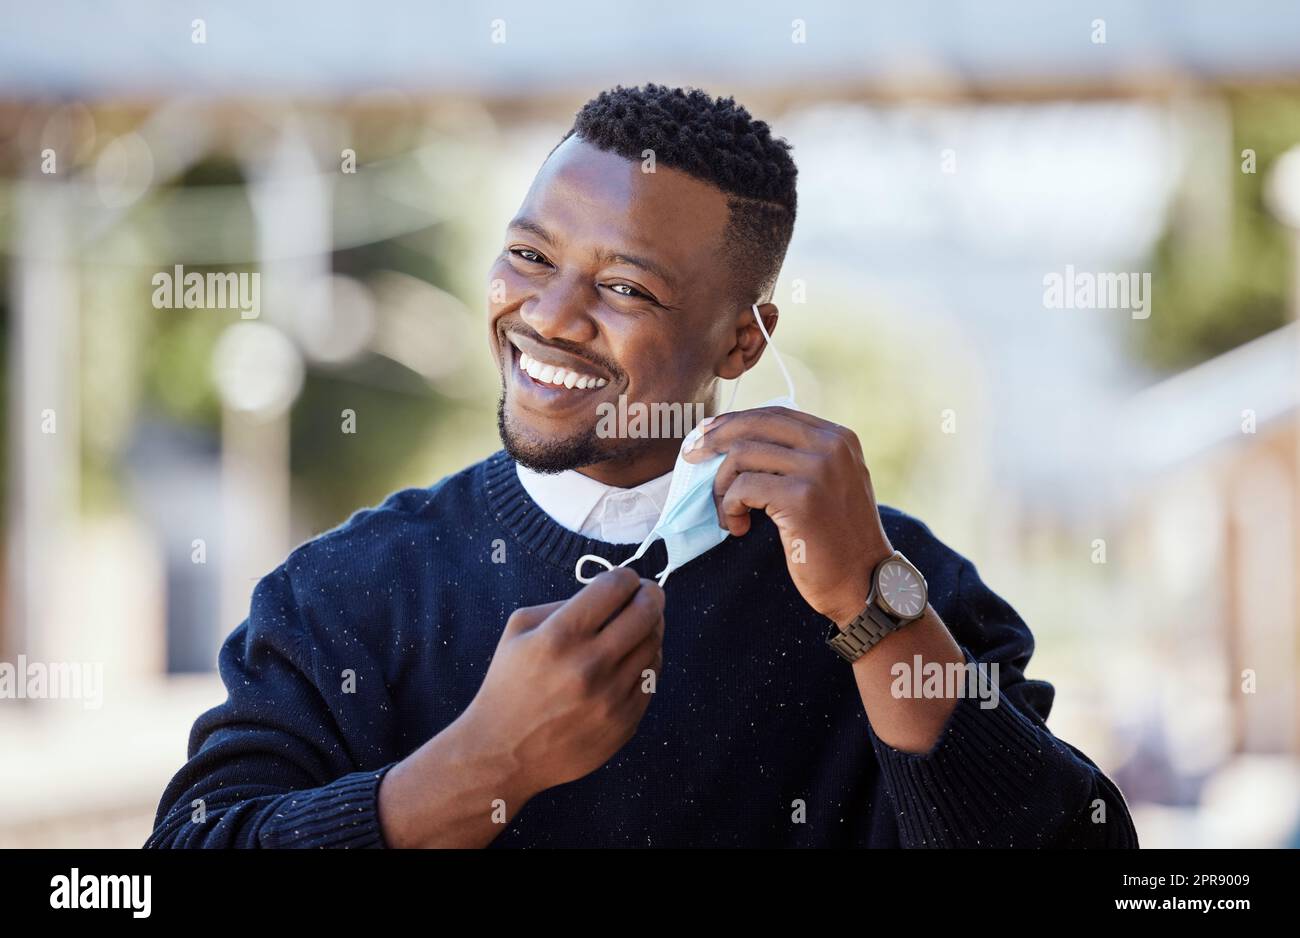 Portrait of a young businessman standing in the street in the city smiling and looking happy on a sunny day. African american male expressing happiness on his face Stock Photo